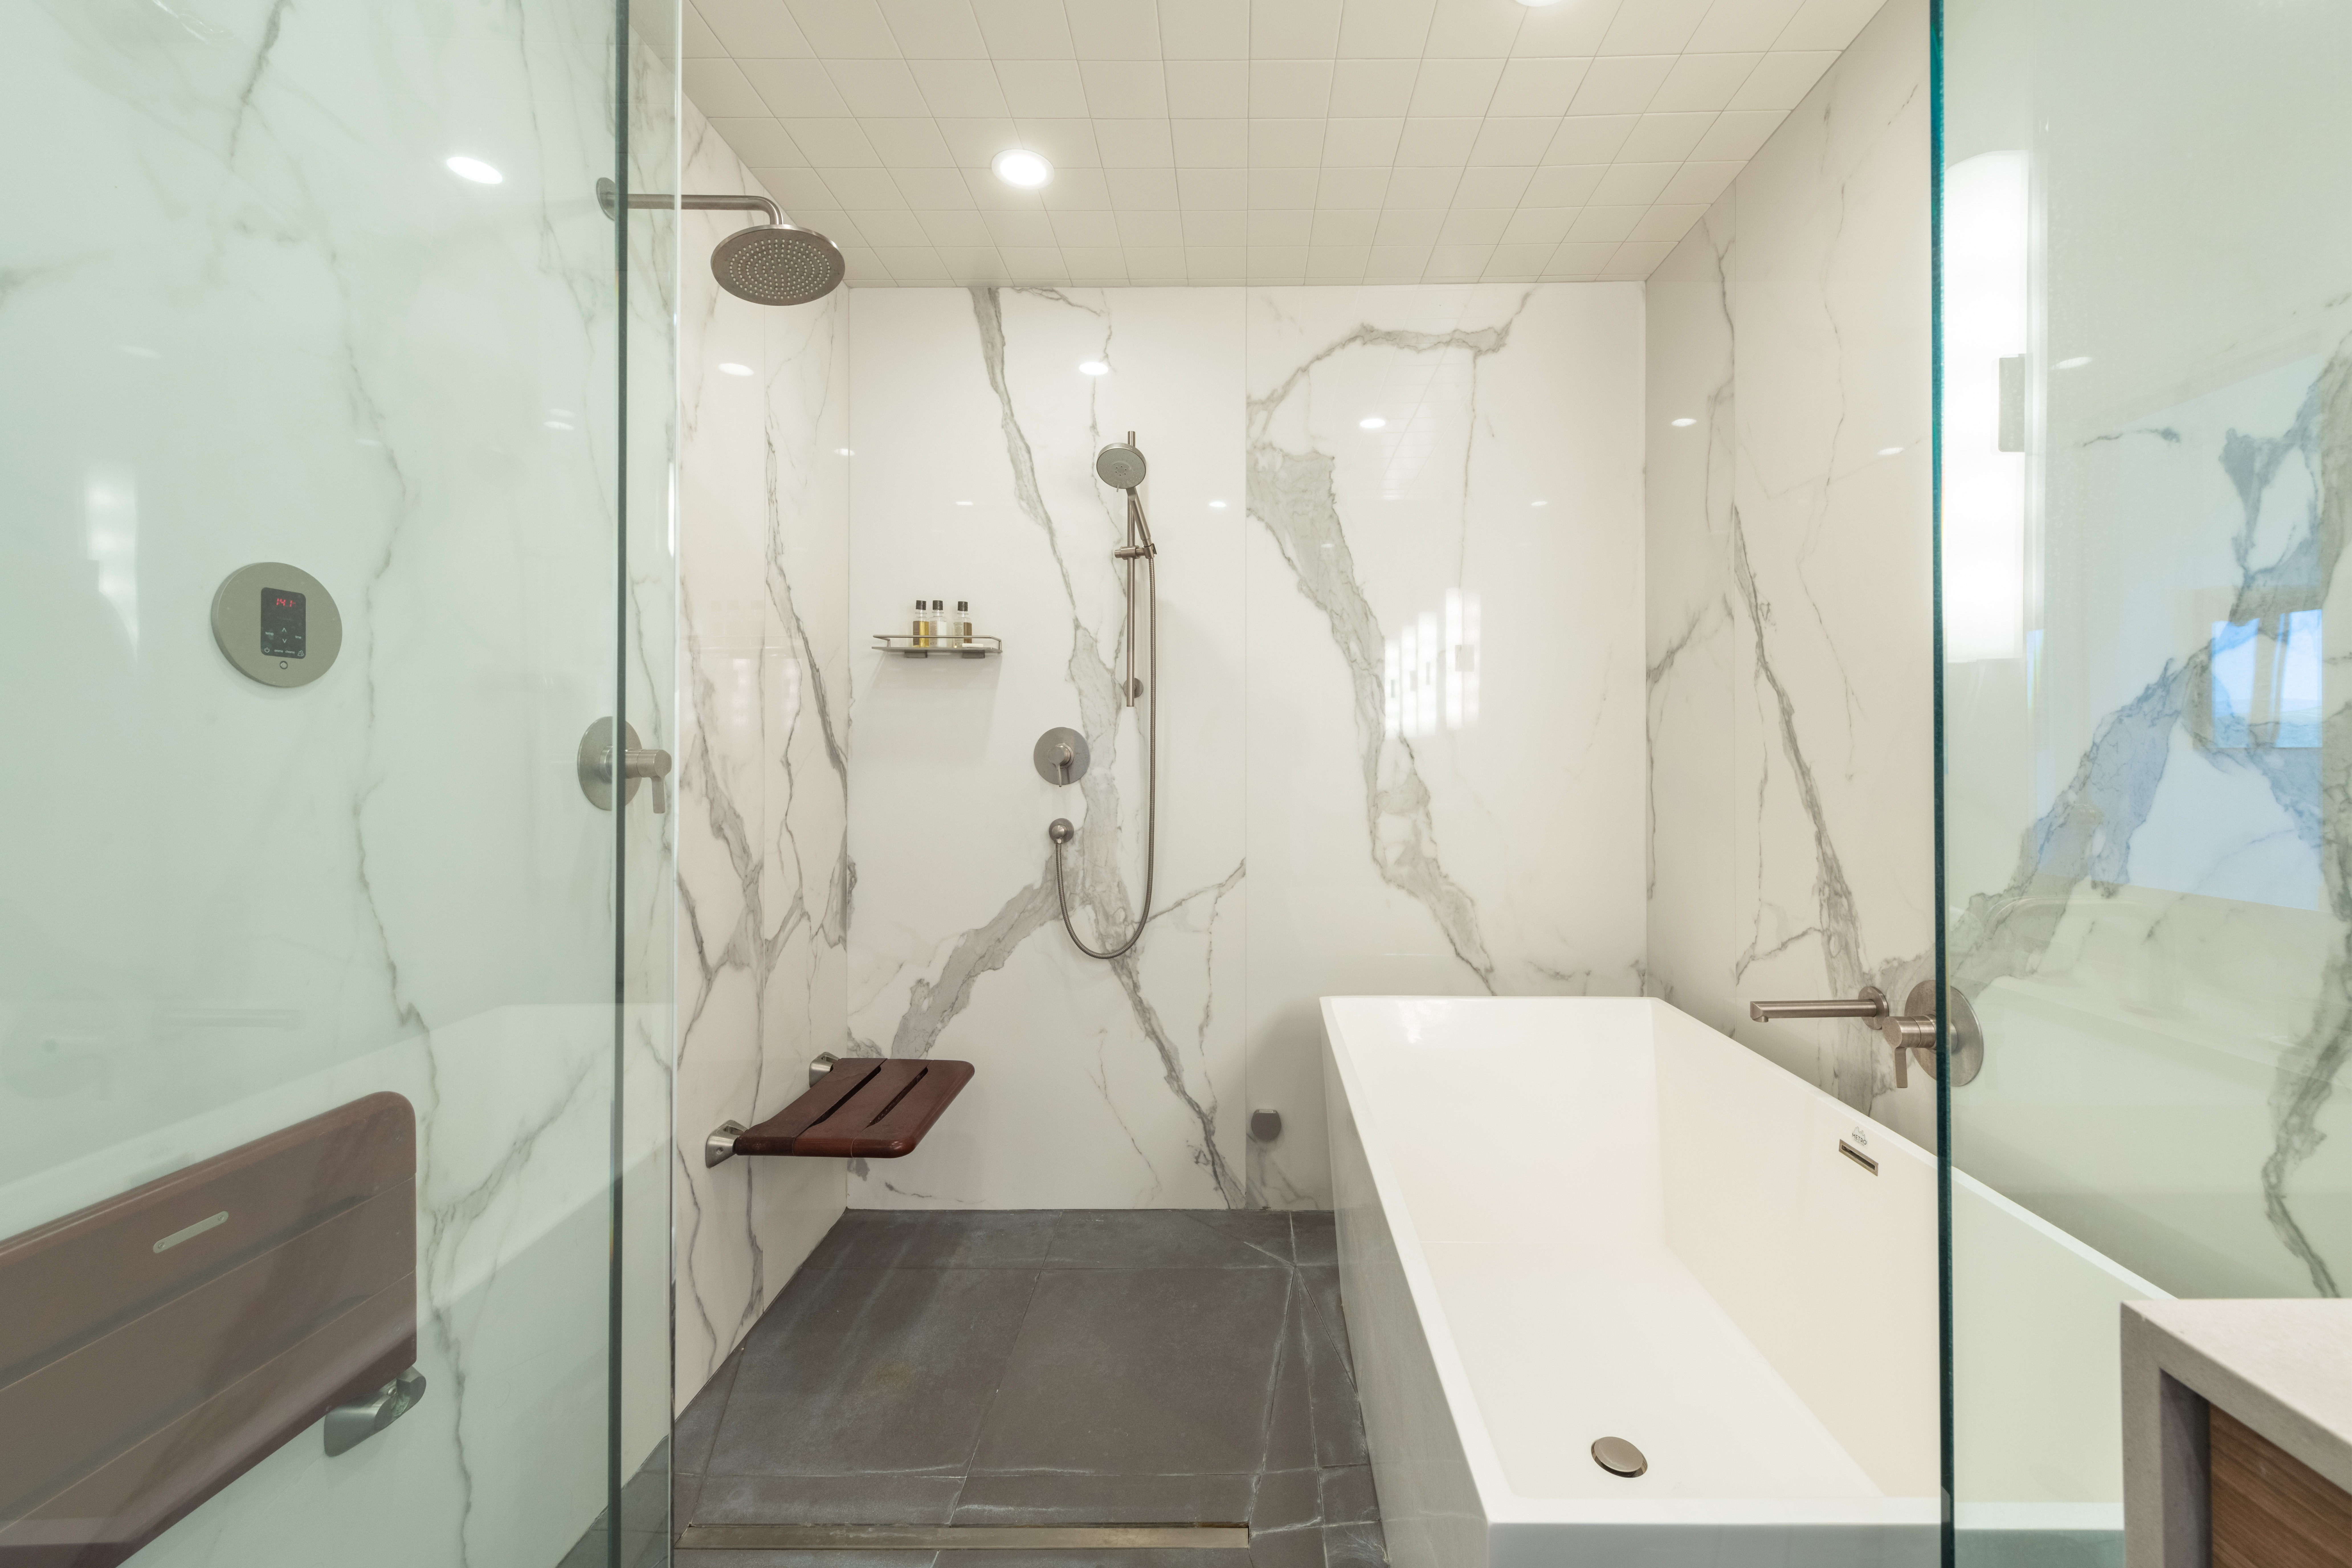 Enjoy the oversized steam shower and soaking tub